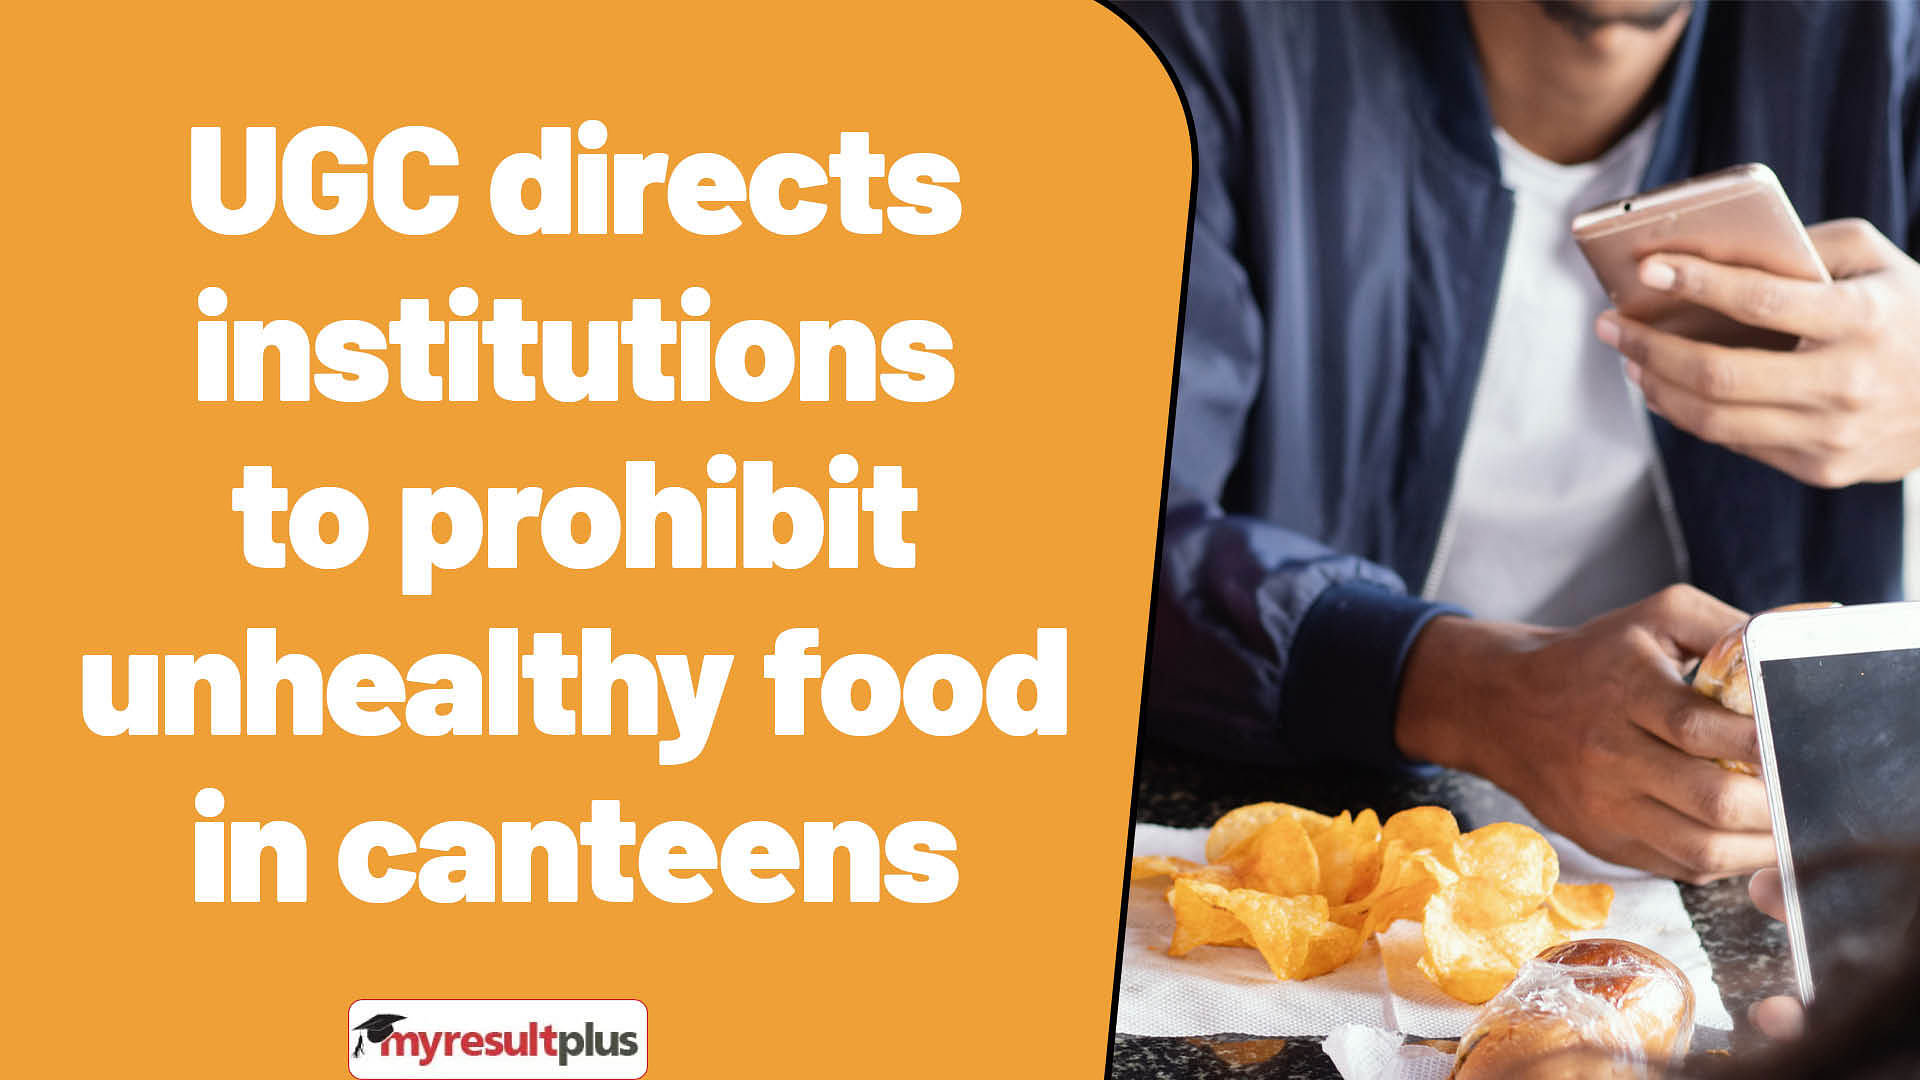 UGC directs institutions to prohibit unhealthy food in canteens